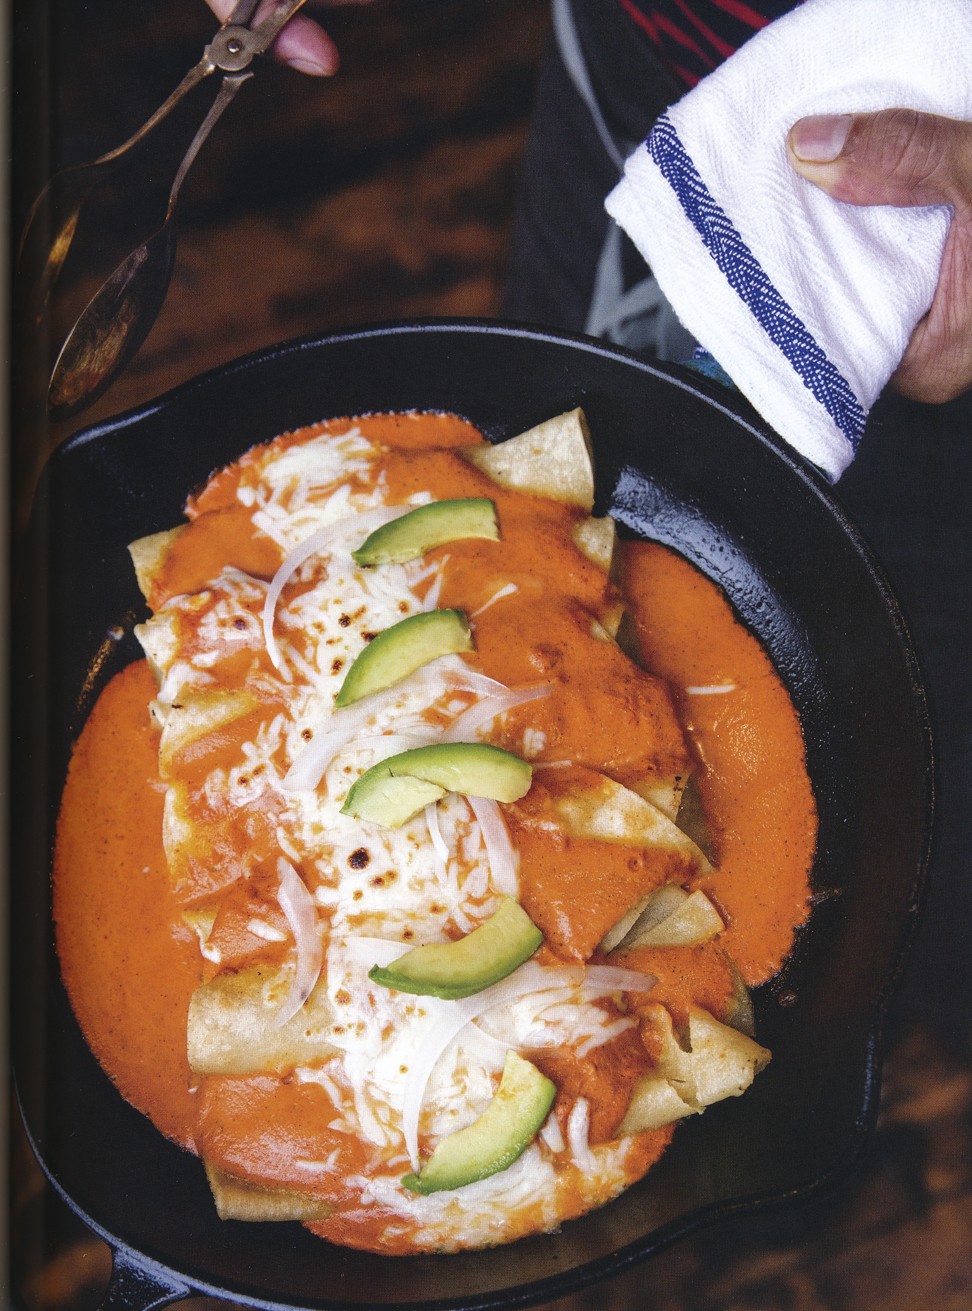 Enchiladas suizas, which are stuffed with cheese.